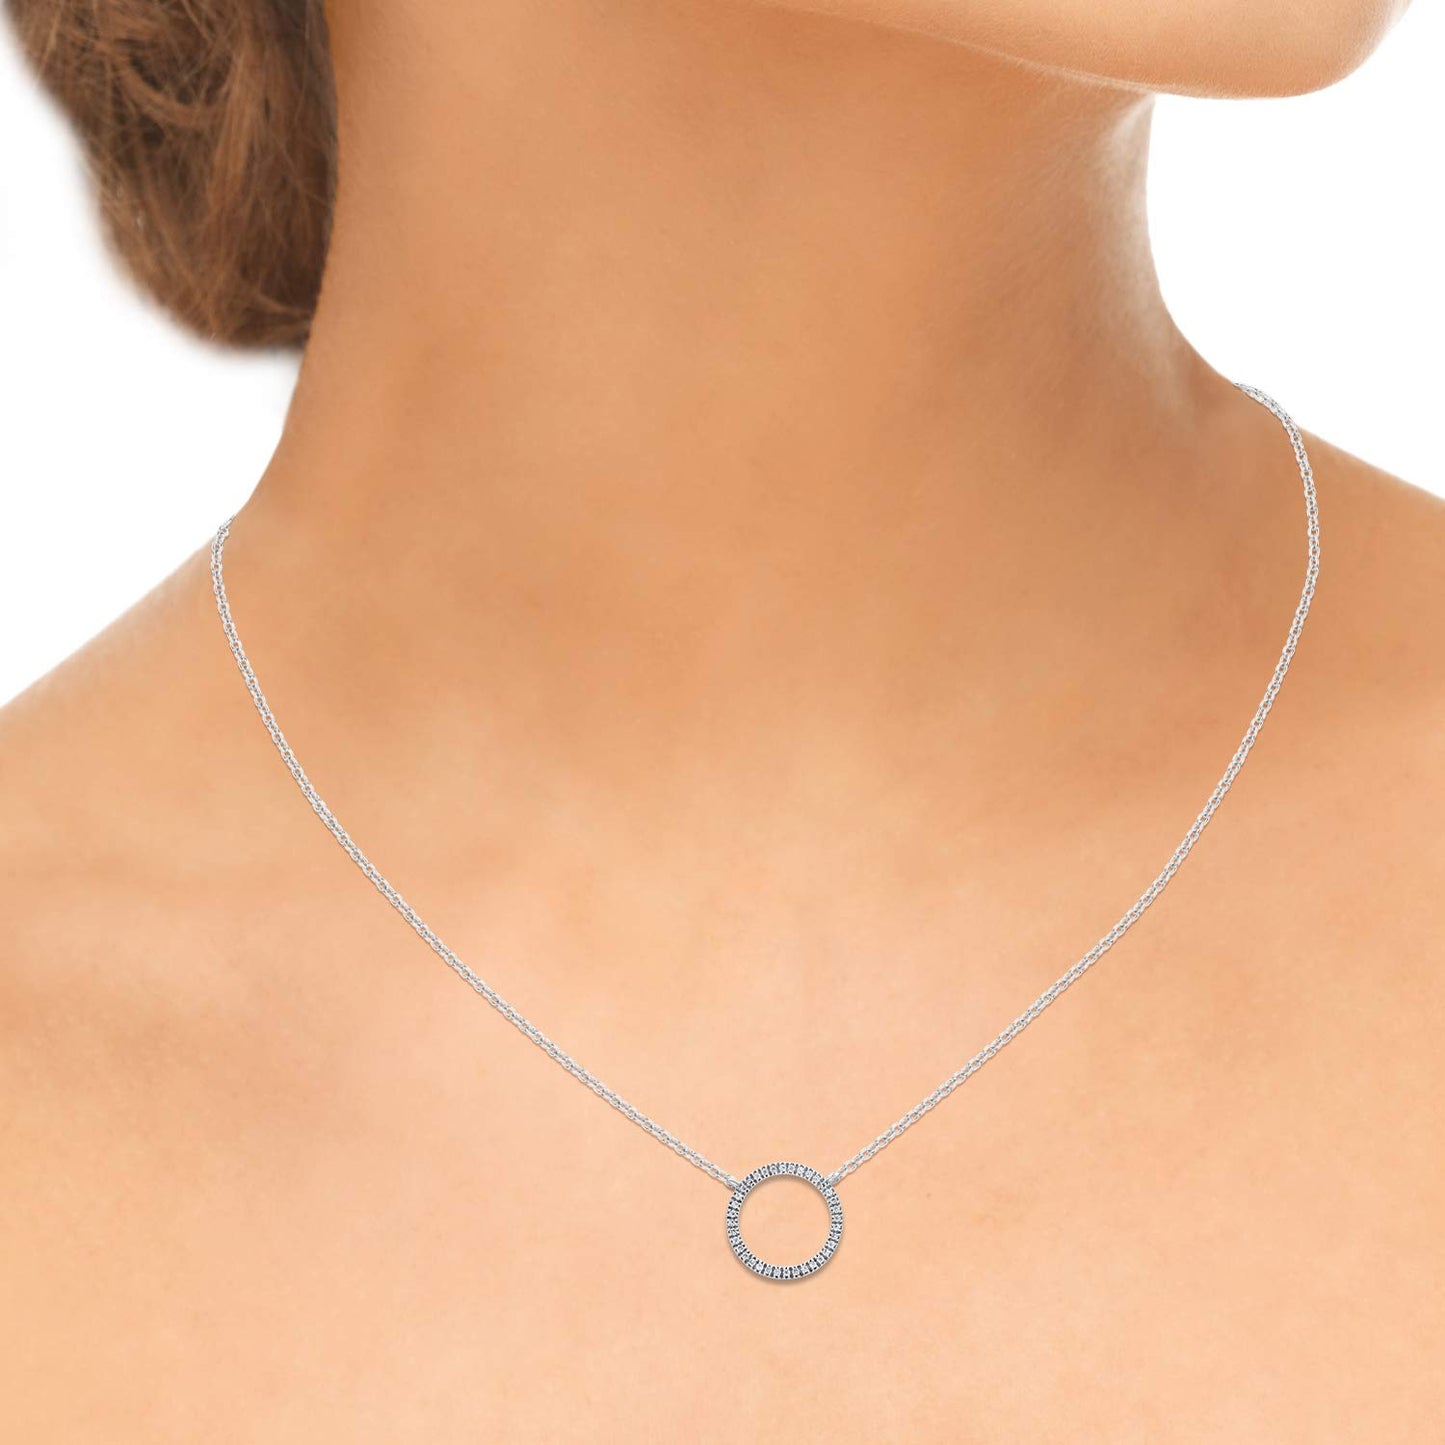 Open Circle Pendant Necklace in 10K Gold